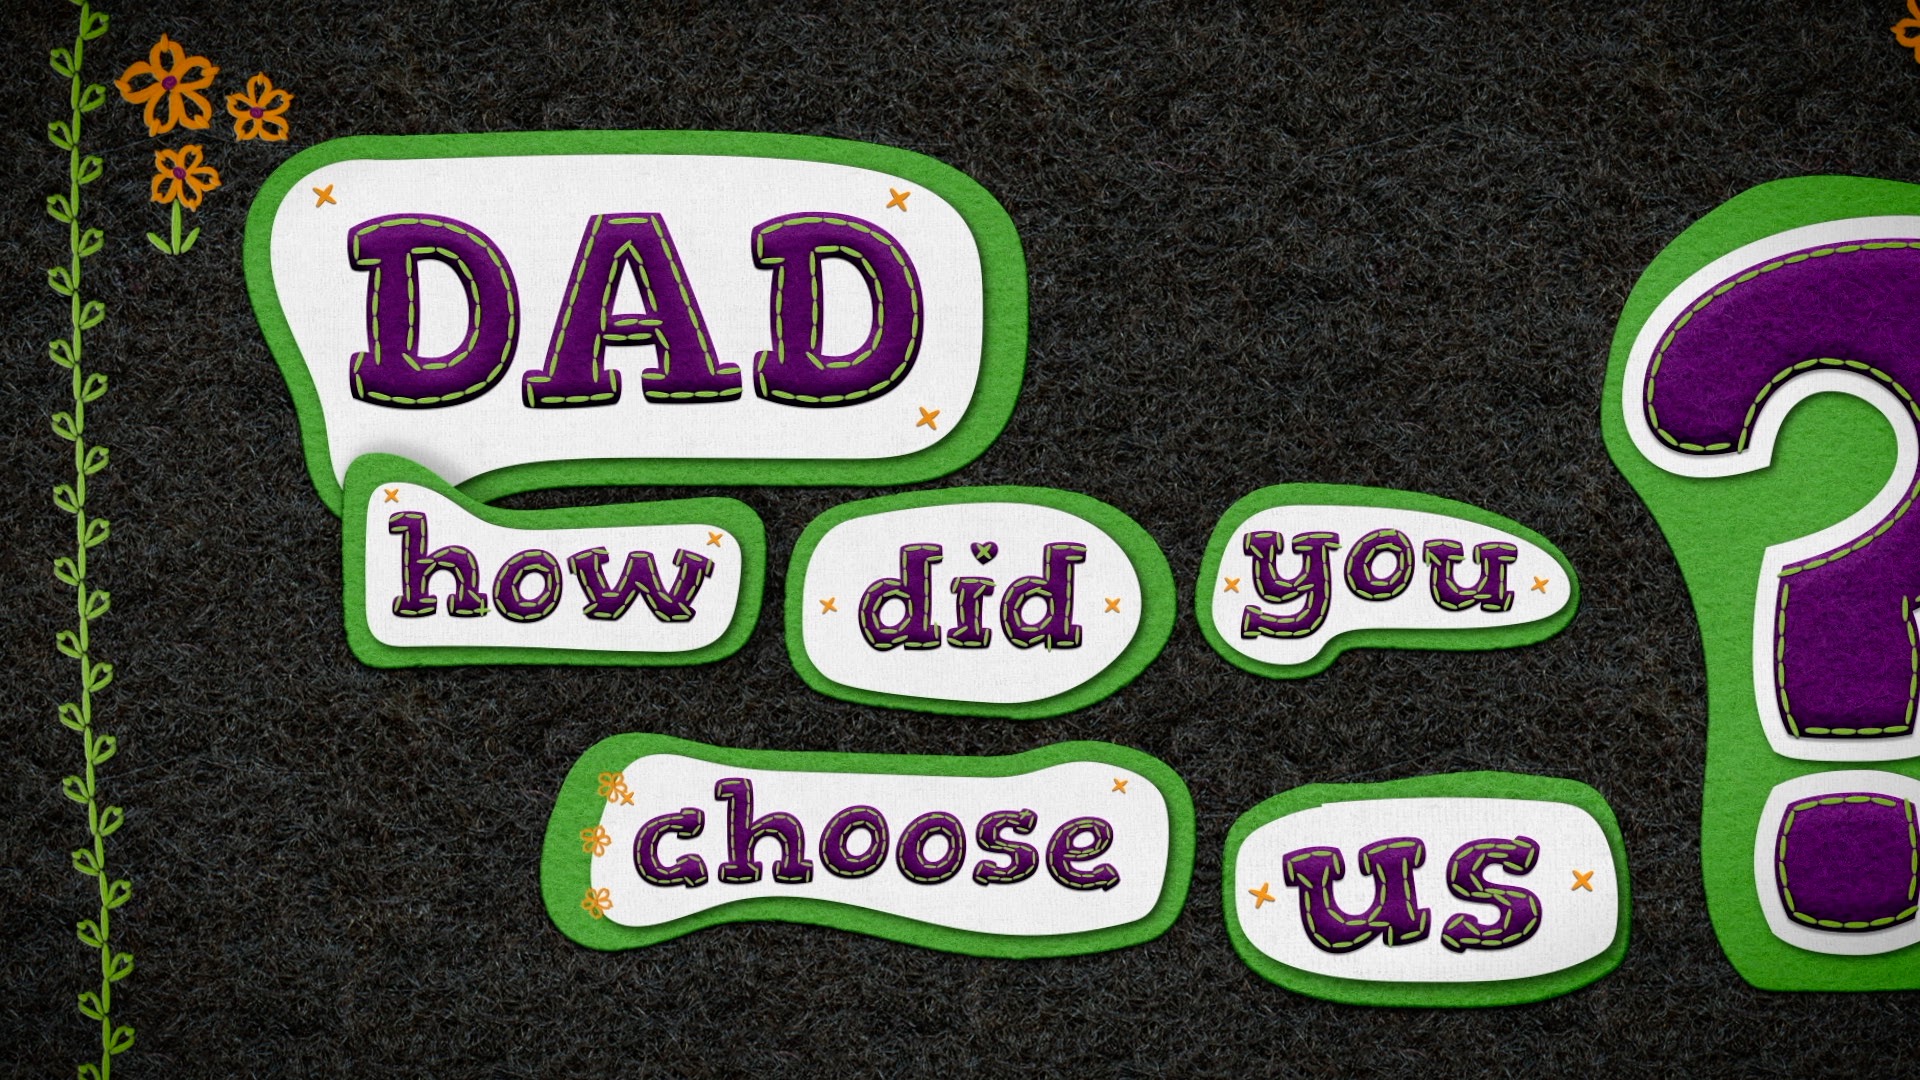 Saskatchewan Foster Families Association, Animation, How Did You Choose Us to be Your Kids?, Portfolio Image, Dad, How Did You Choose Us To Be Your Kids?